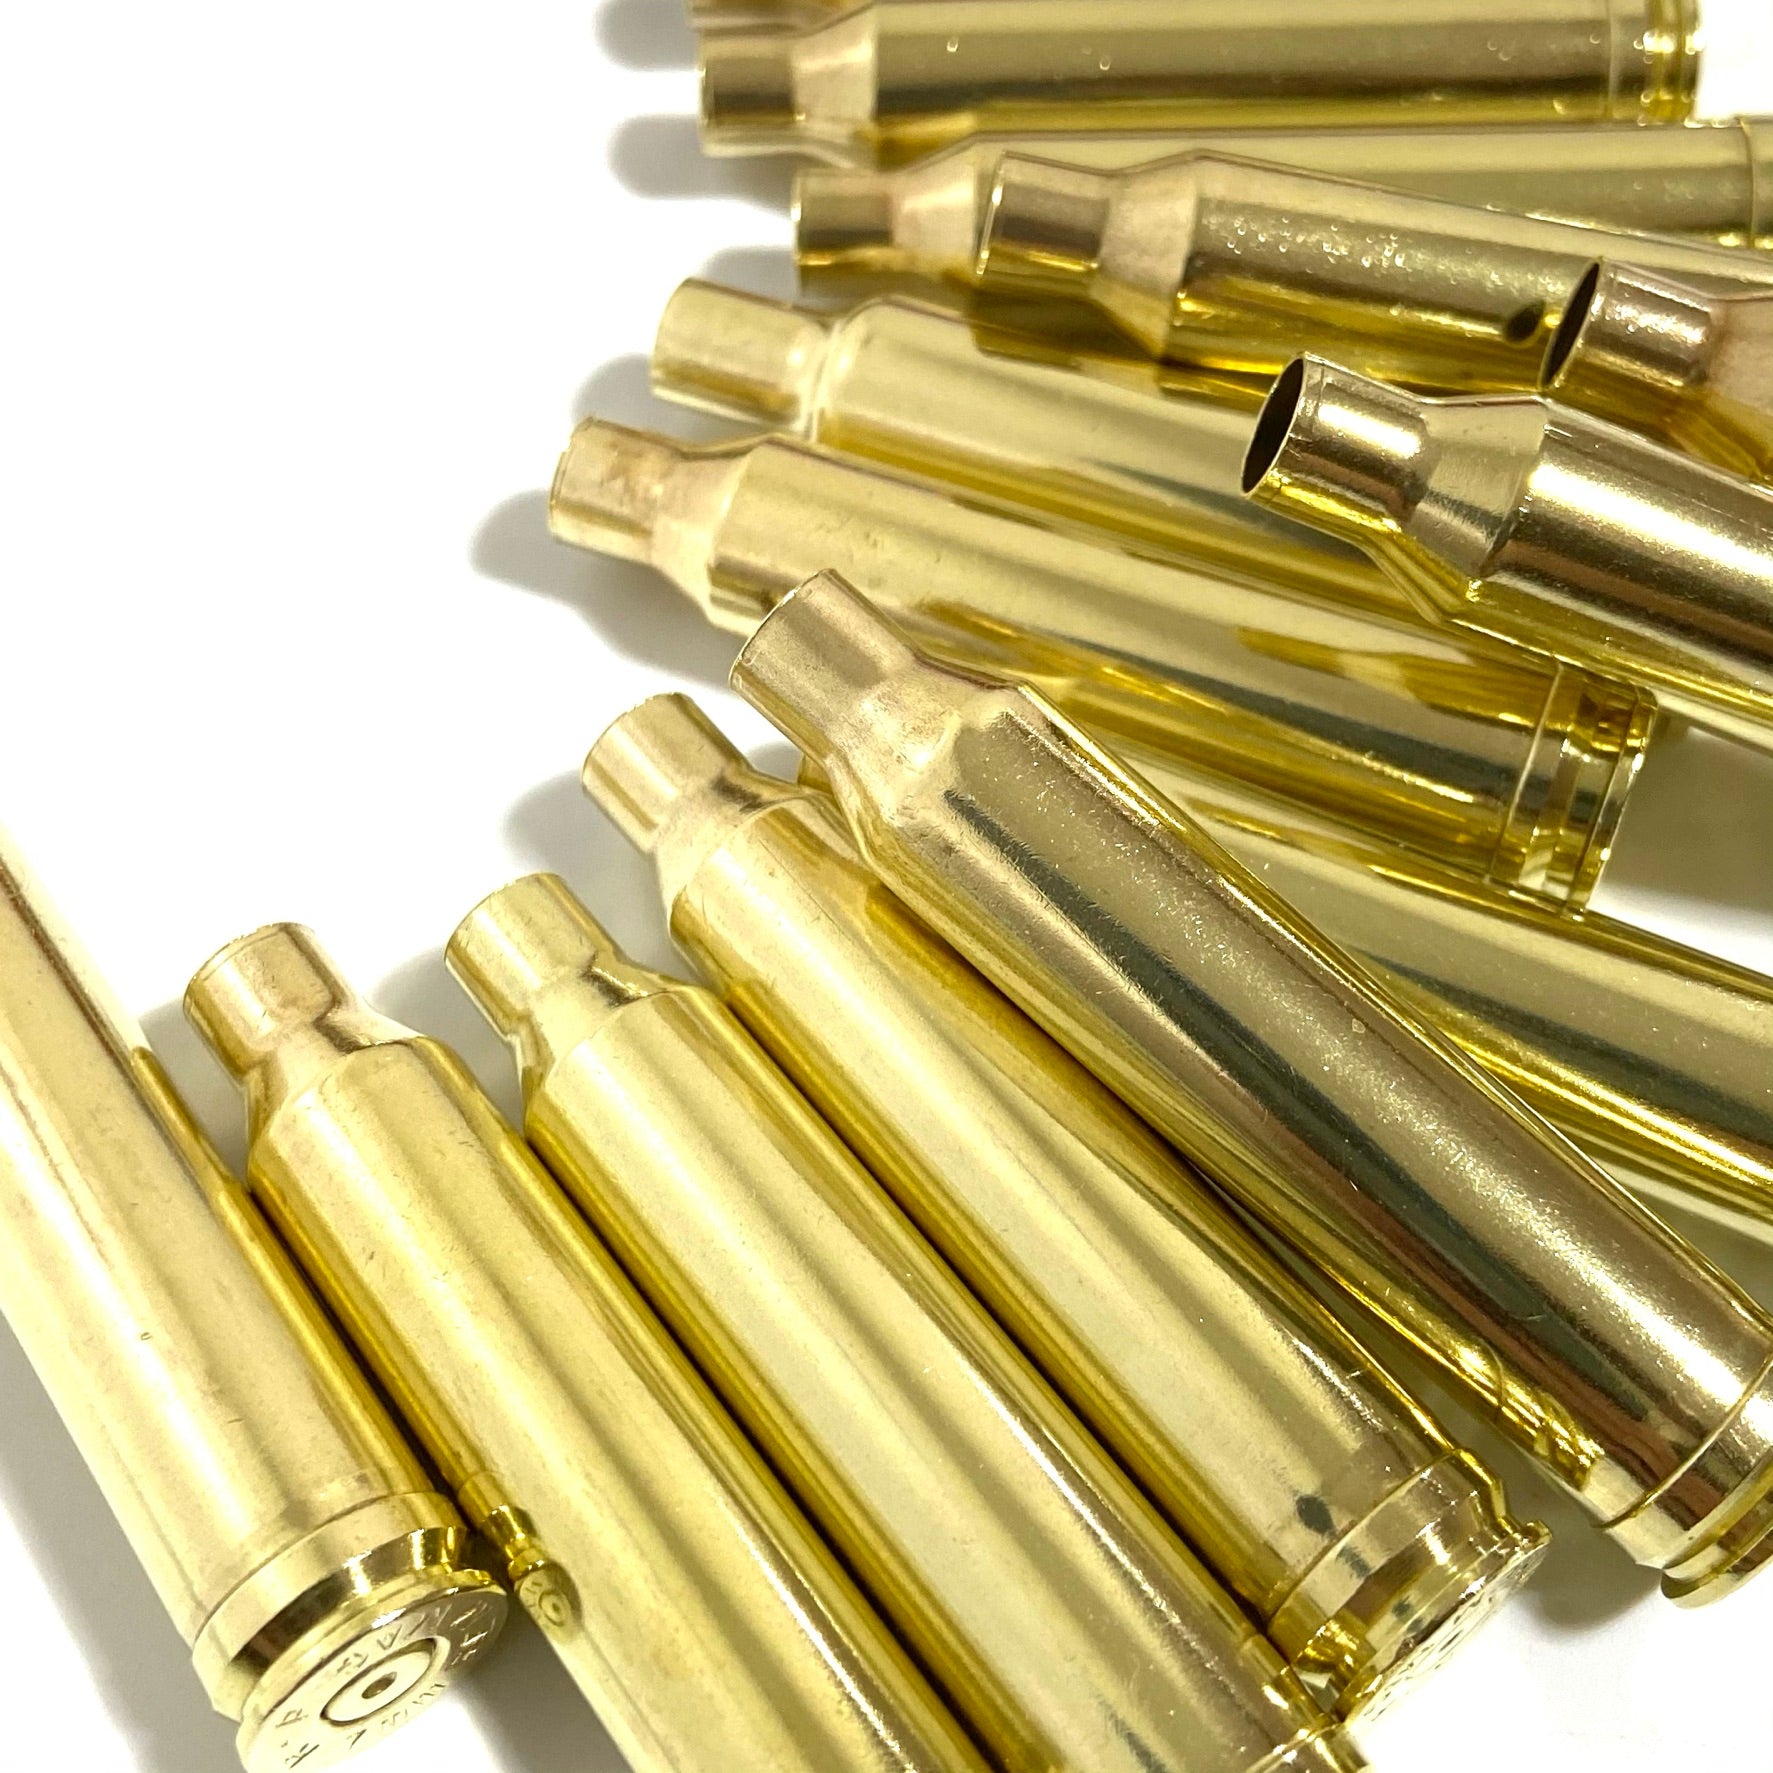 7MM Remington Magnum Once Fired Empty Spent Brass Casings Polished Shells –